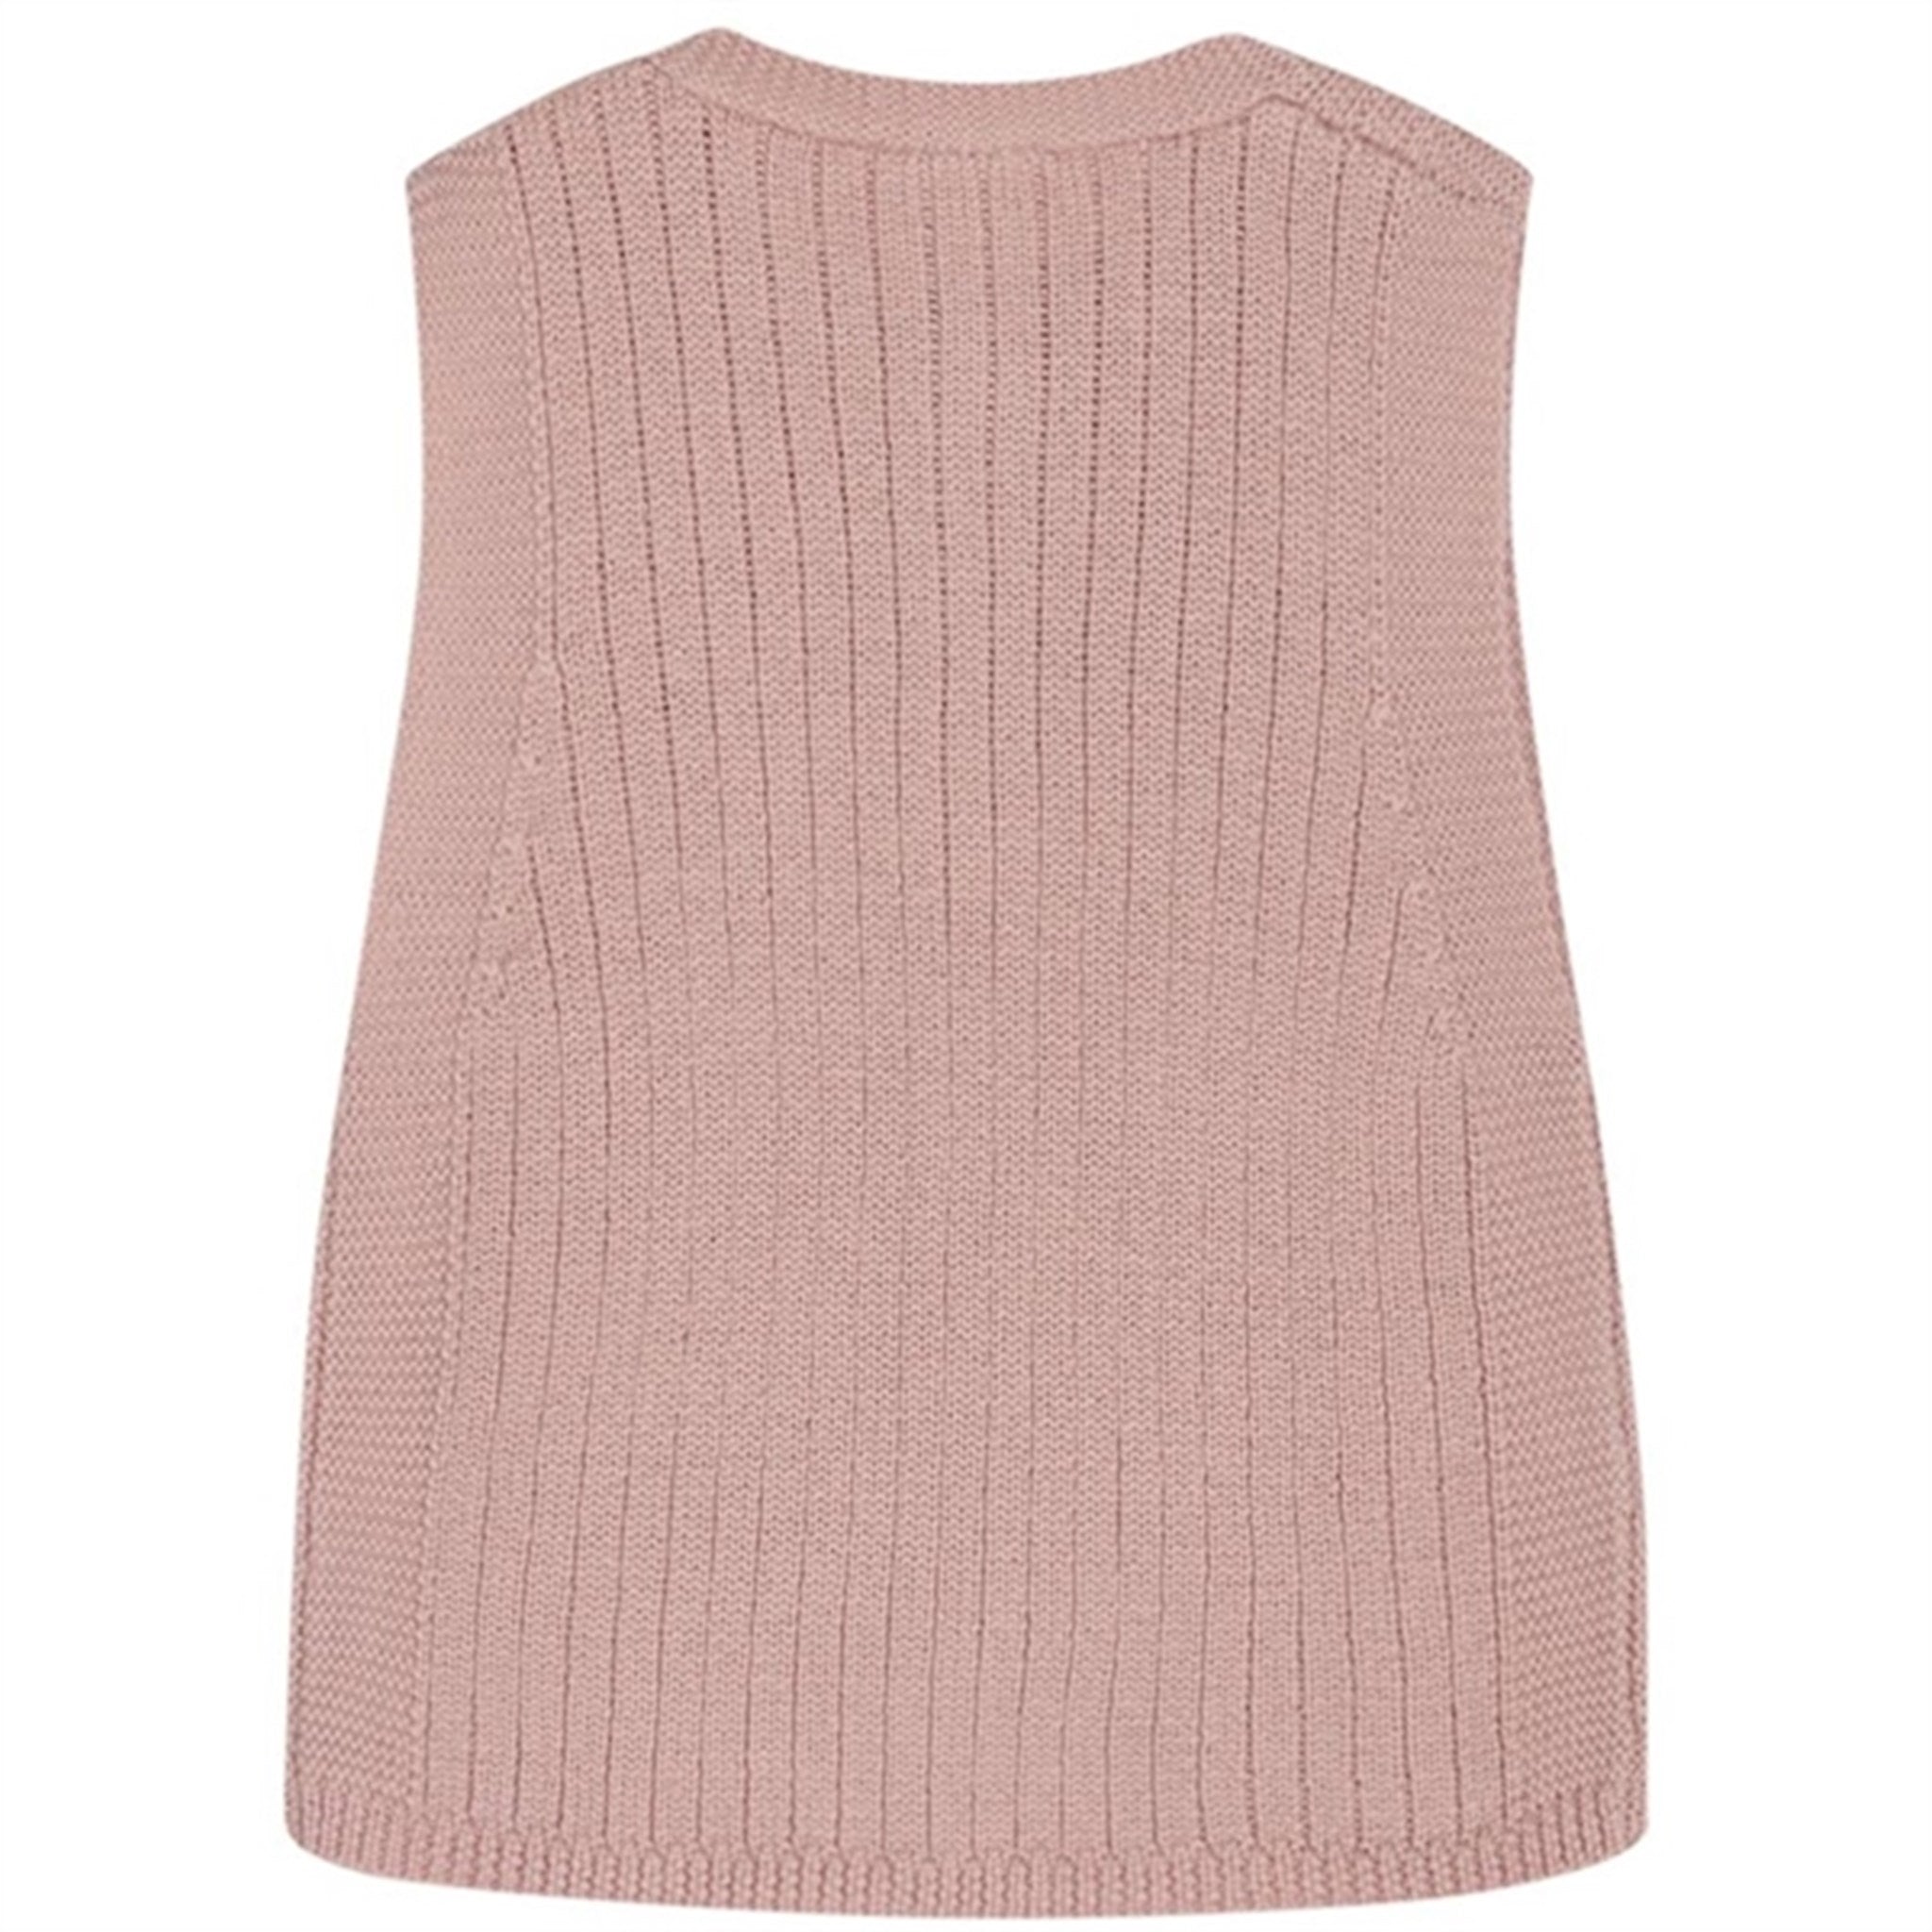 Hust & Claire Baby Shade Rose Edi Vest 2